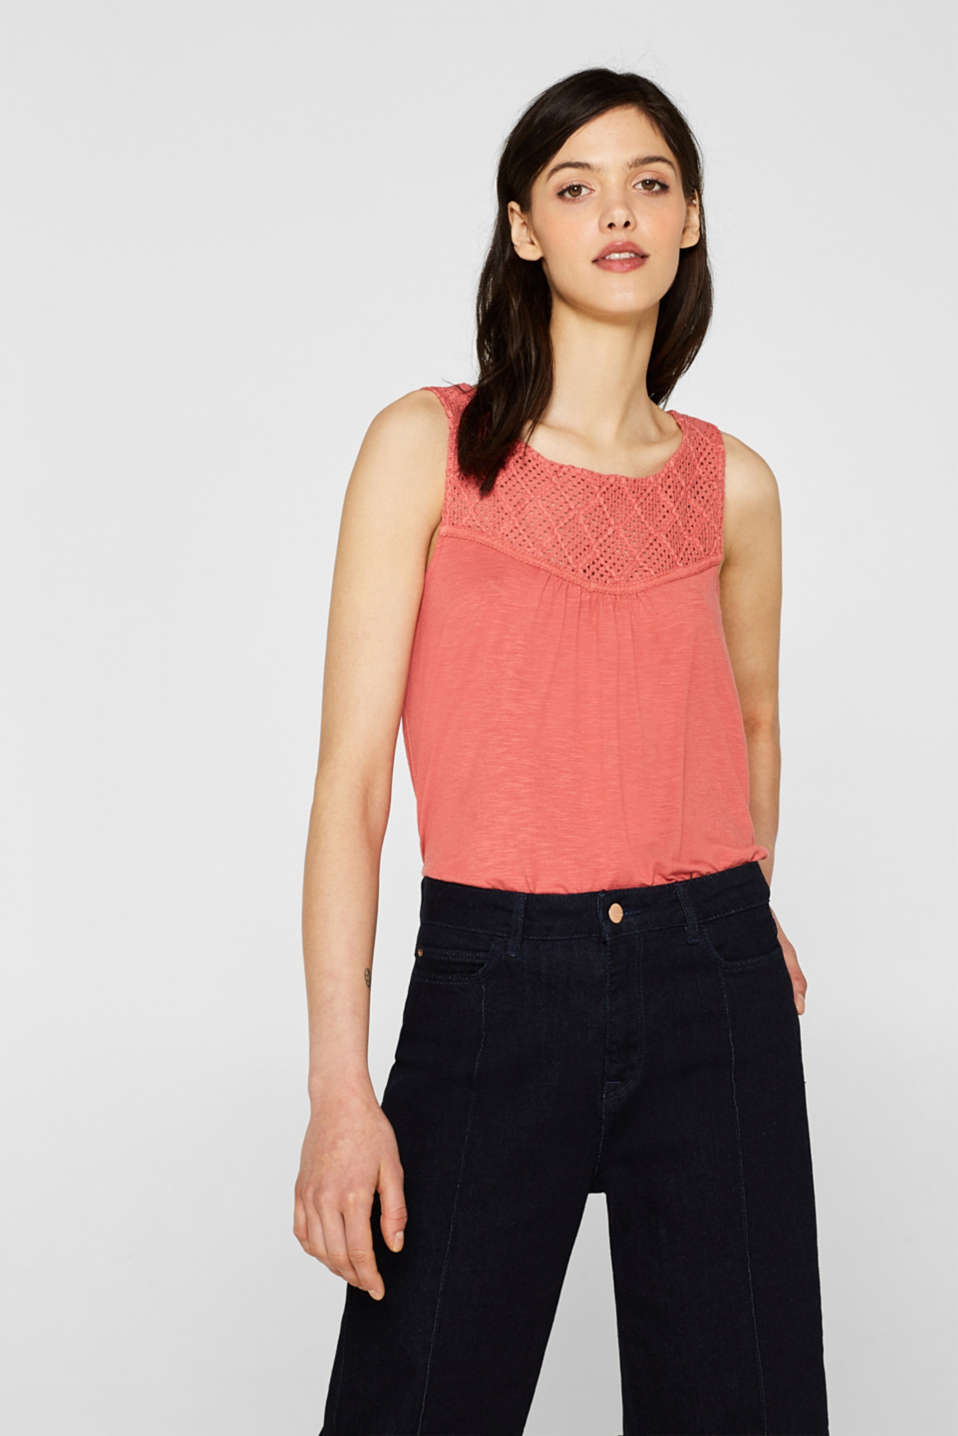 Esprit - Slub jersey top with crocheted lace at our Online Shop